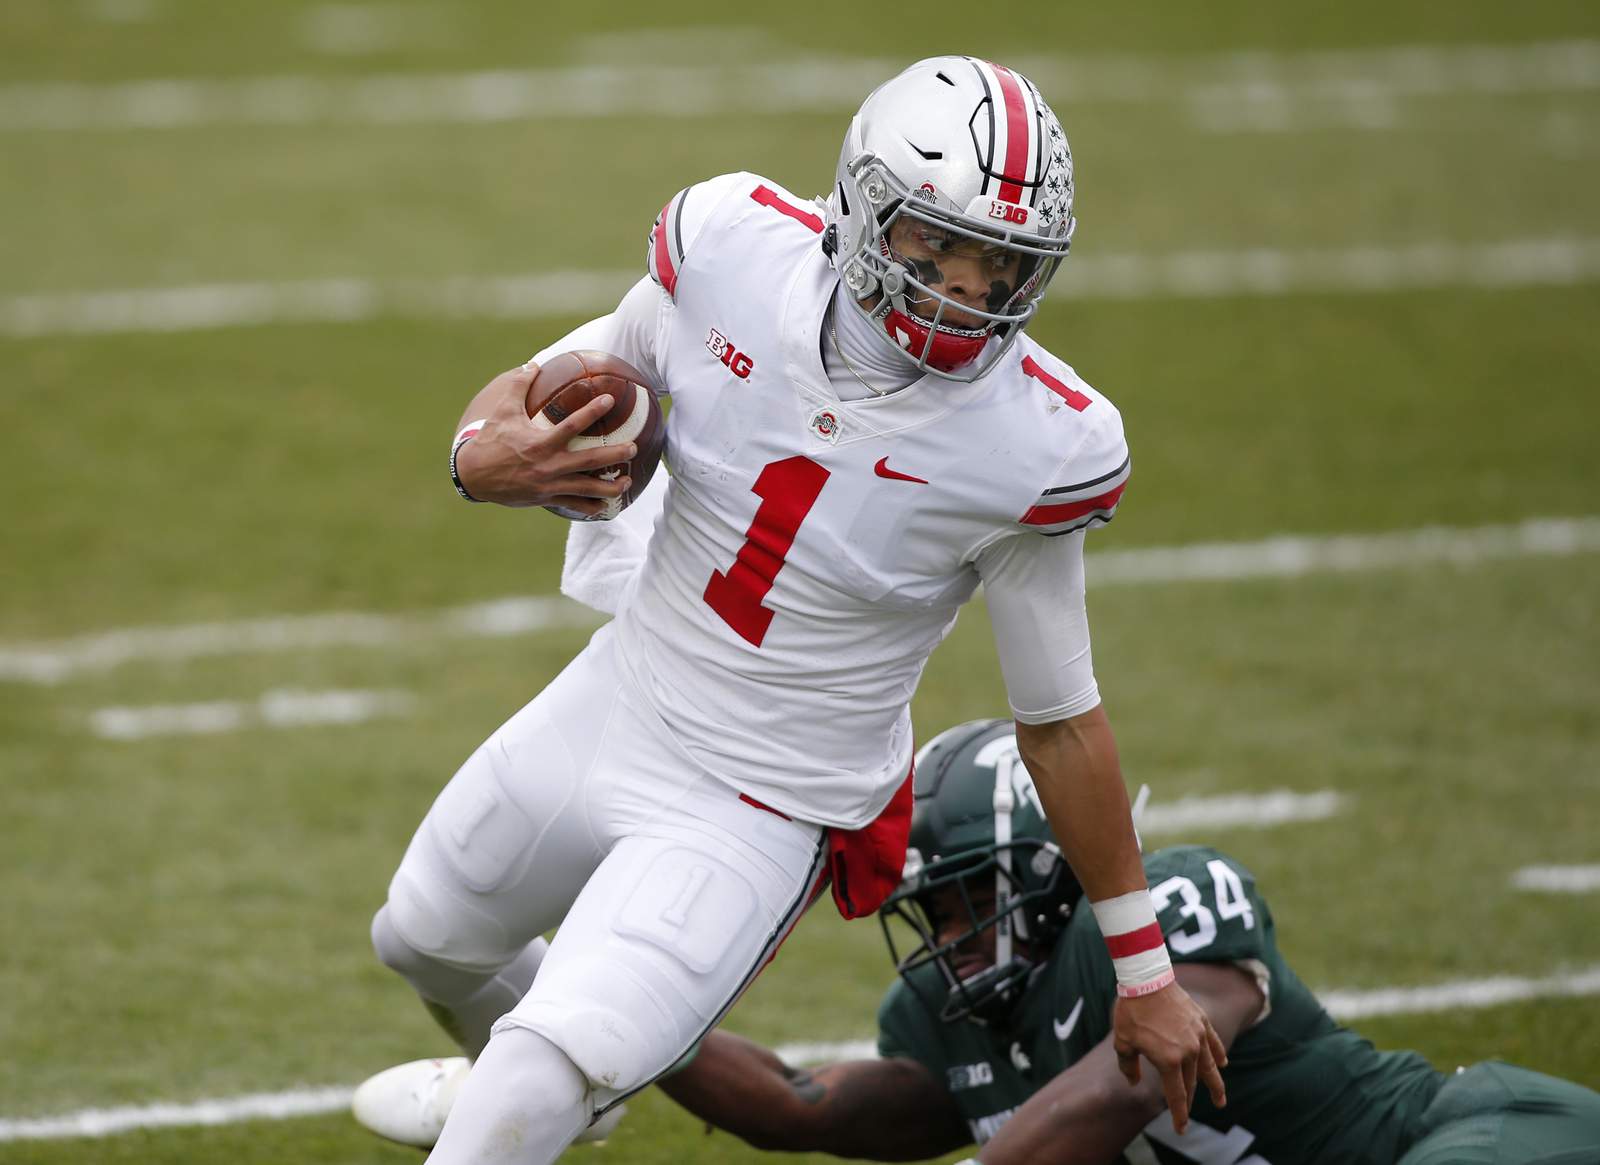 No. 3 Ohio State has no problem with Michigan State Spartans in 52-12 win